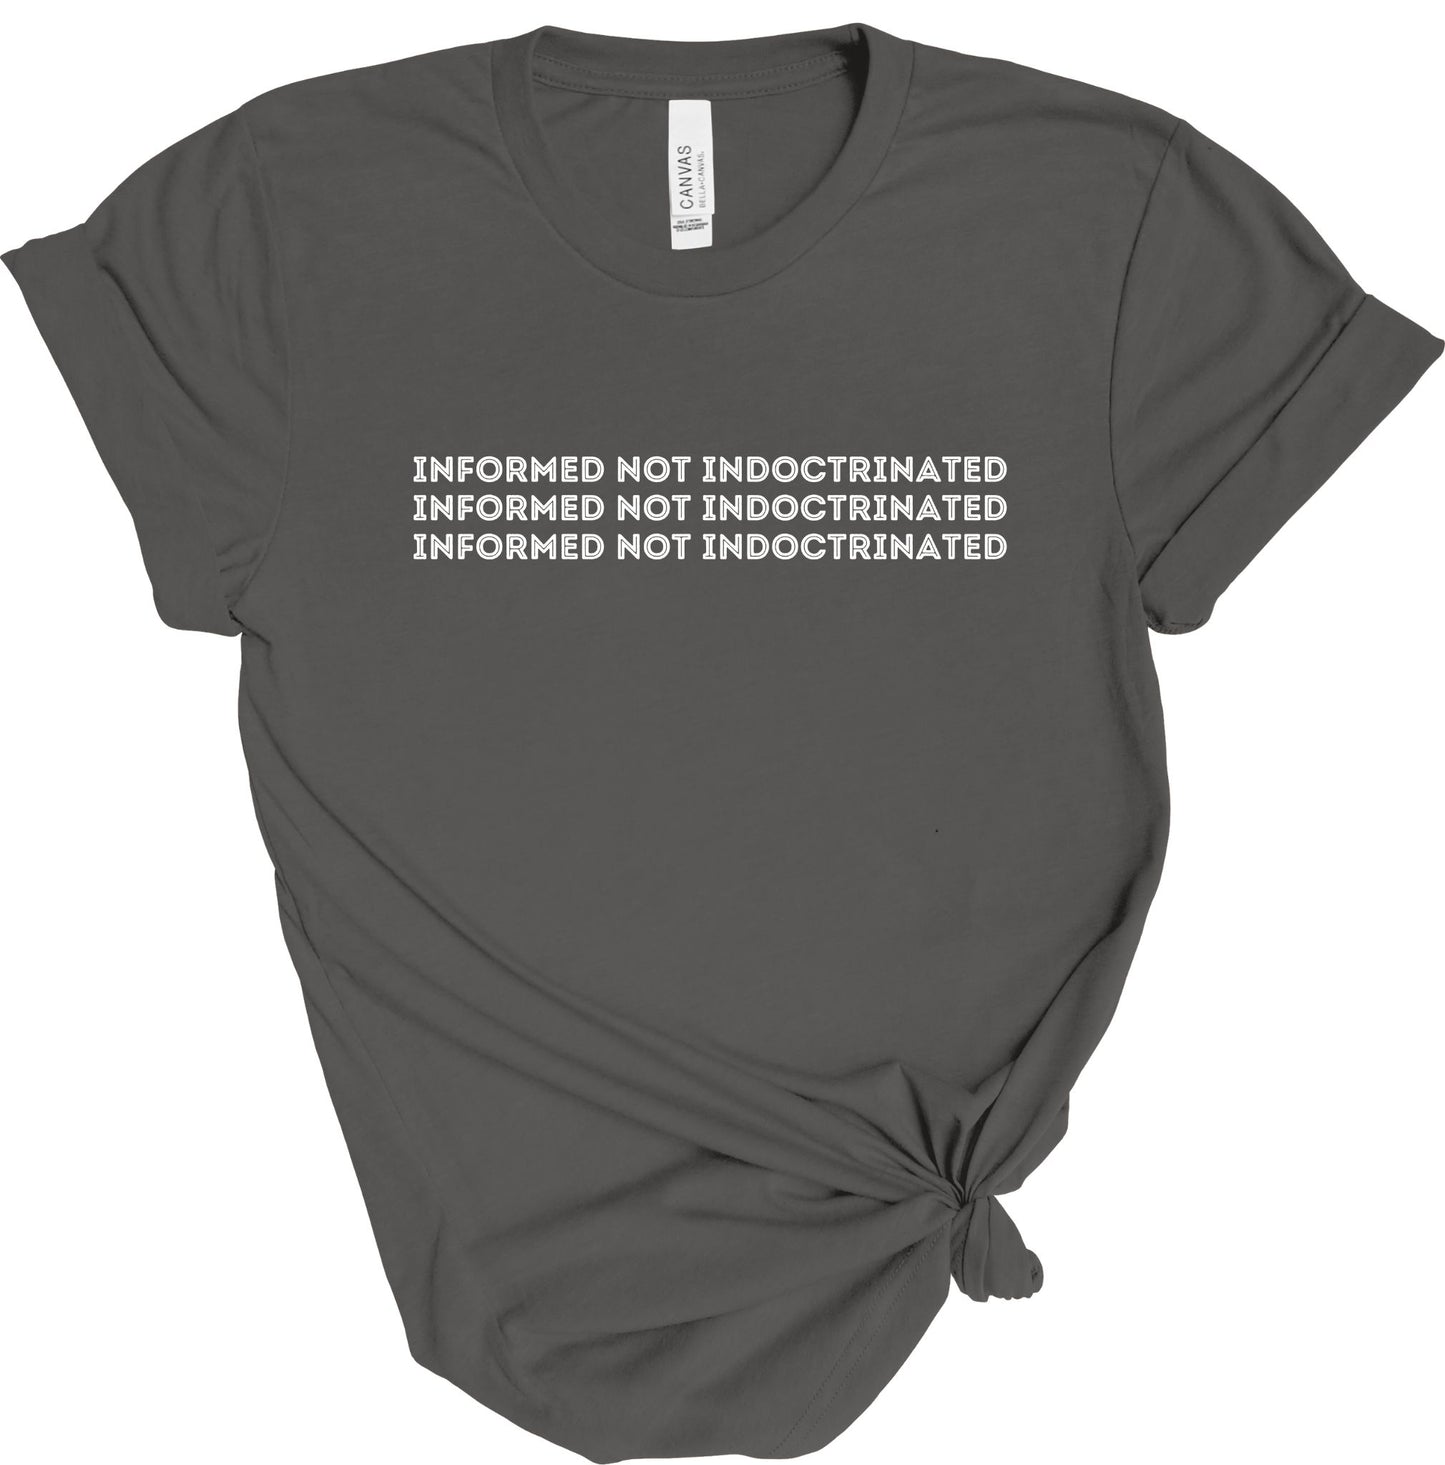 INFORMED NOT INDOCRINATED TEE